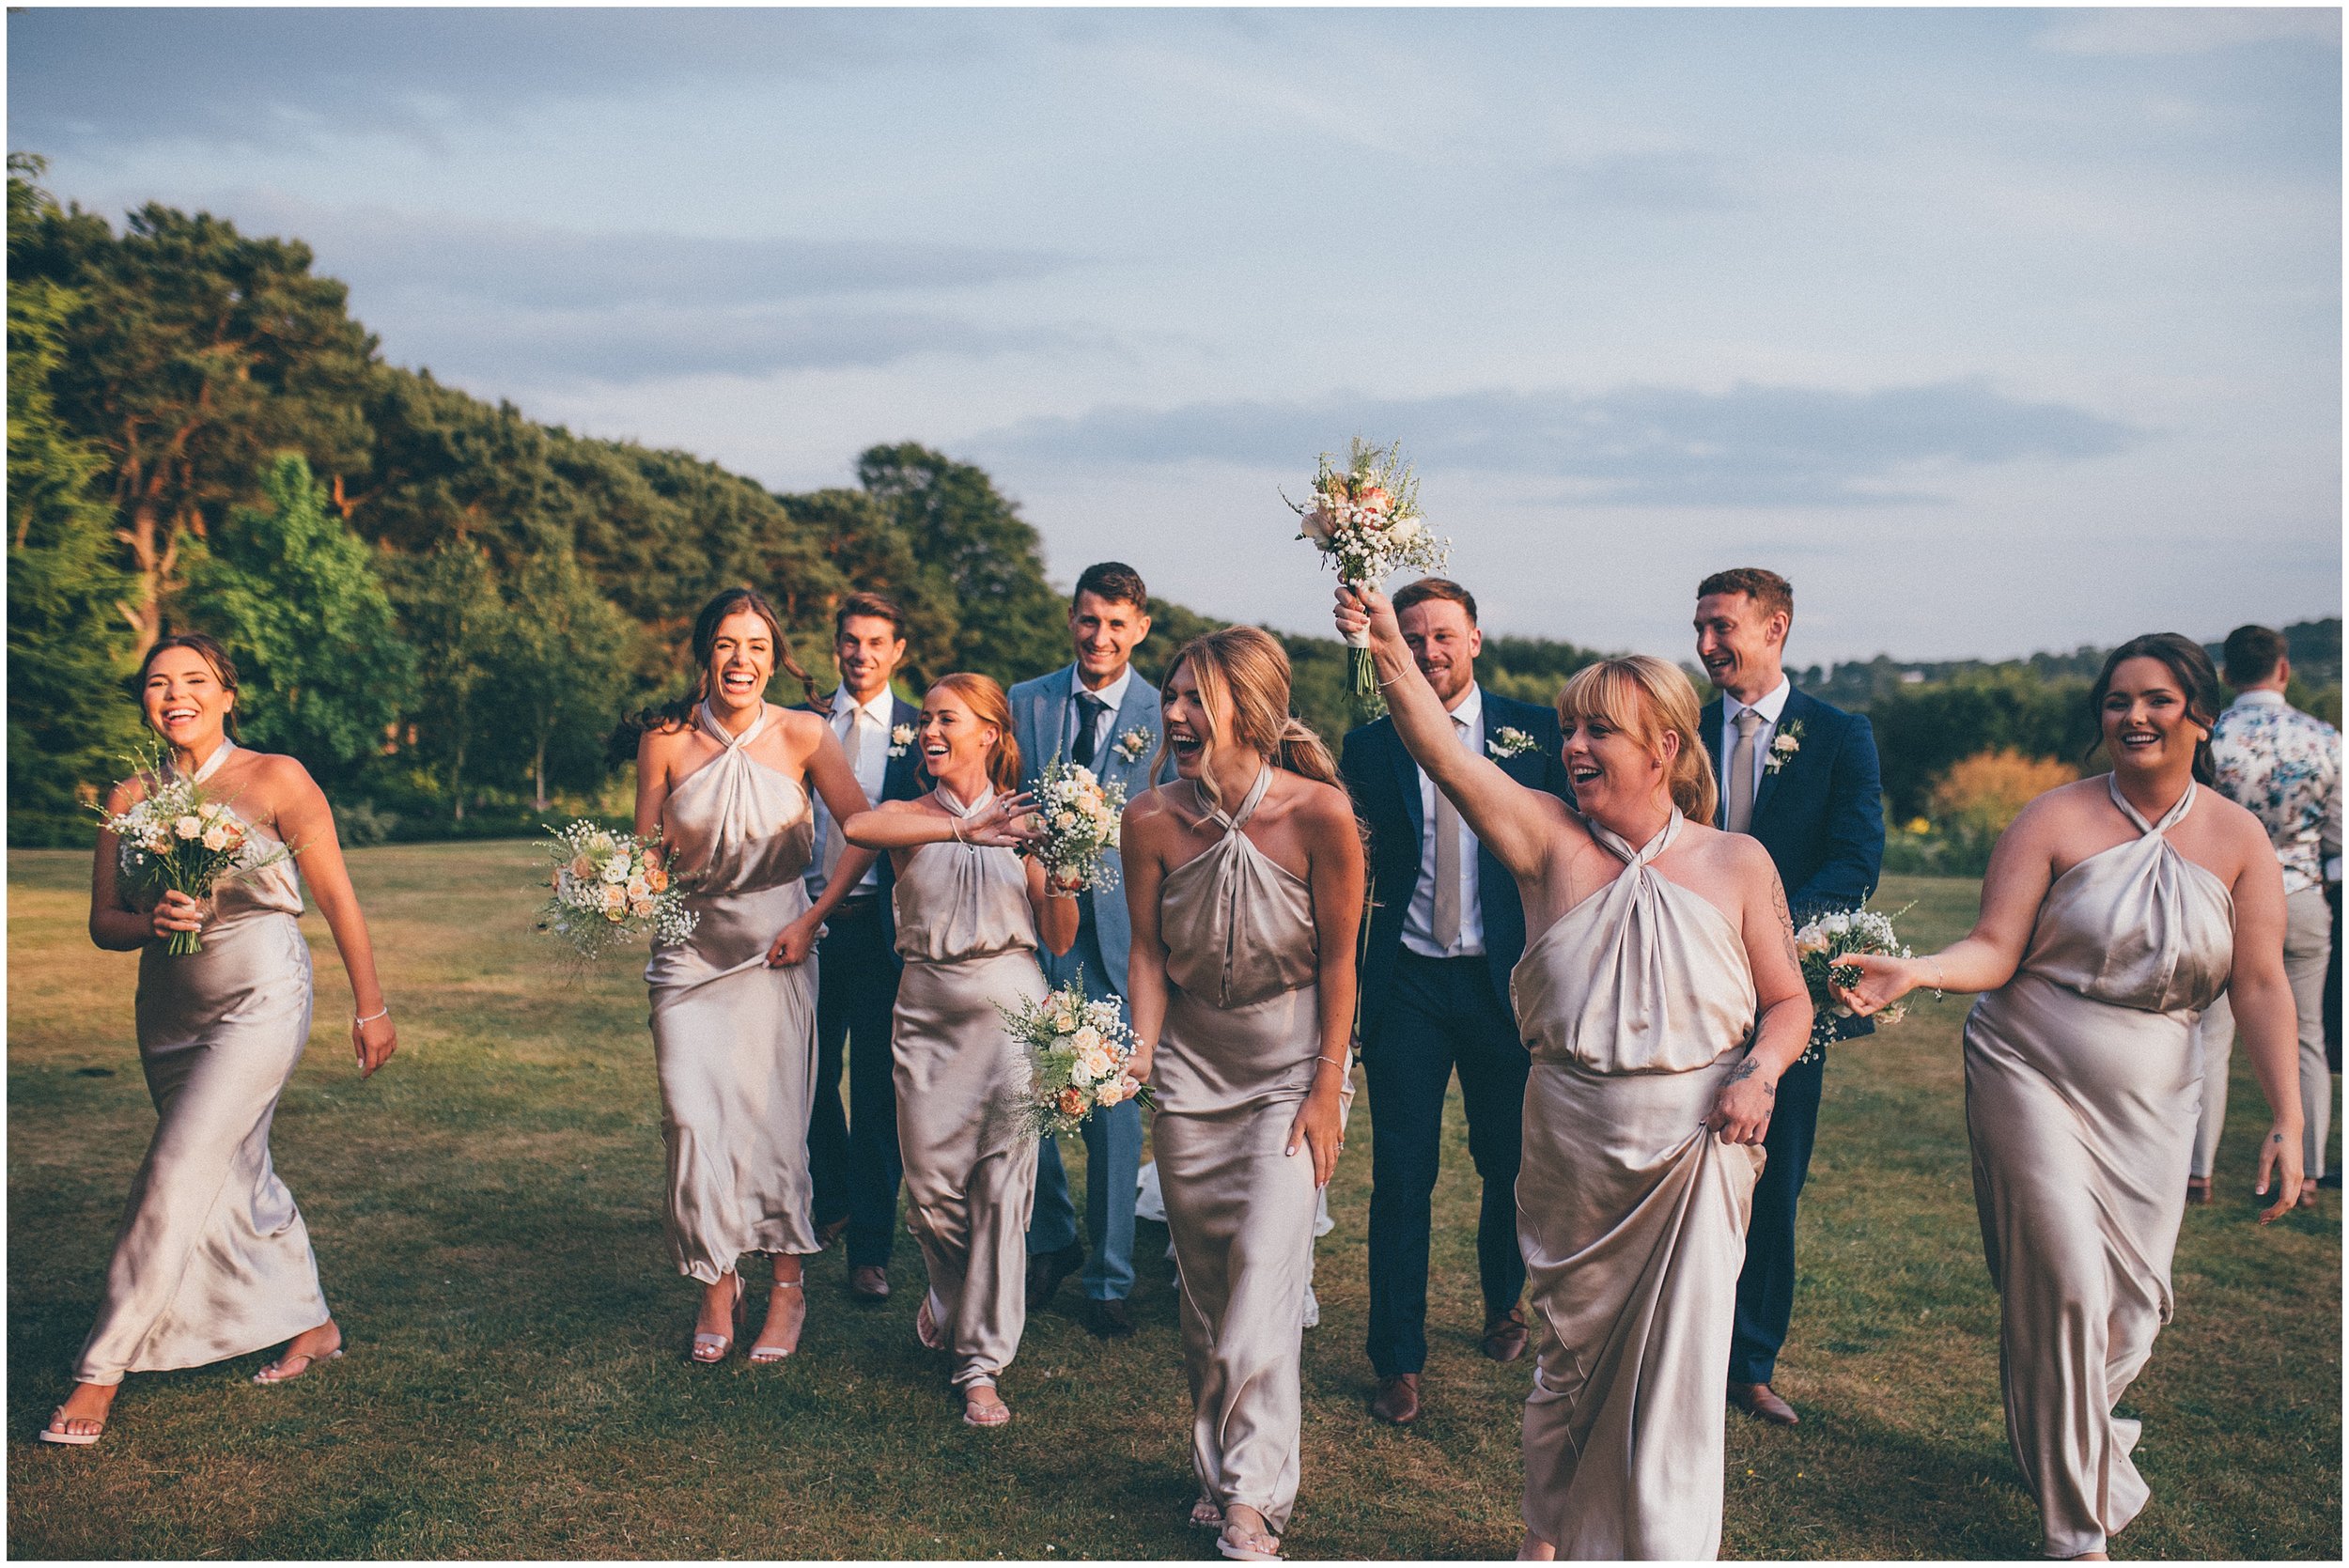 Bridal party enjoy golden hour at Abbeywood Estate wedding venue in Delamere, Cheshire.